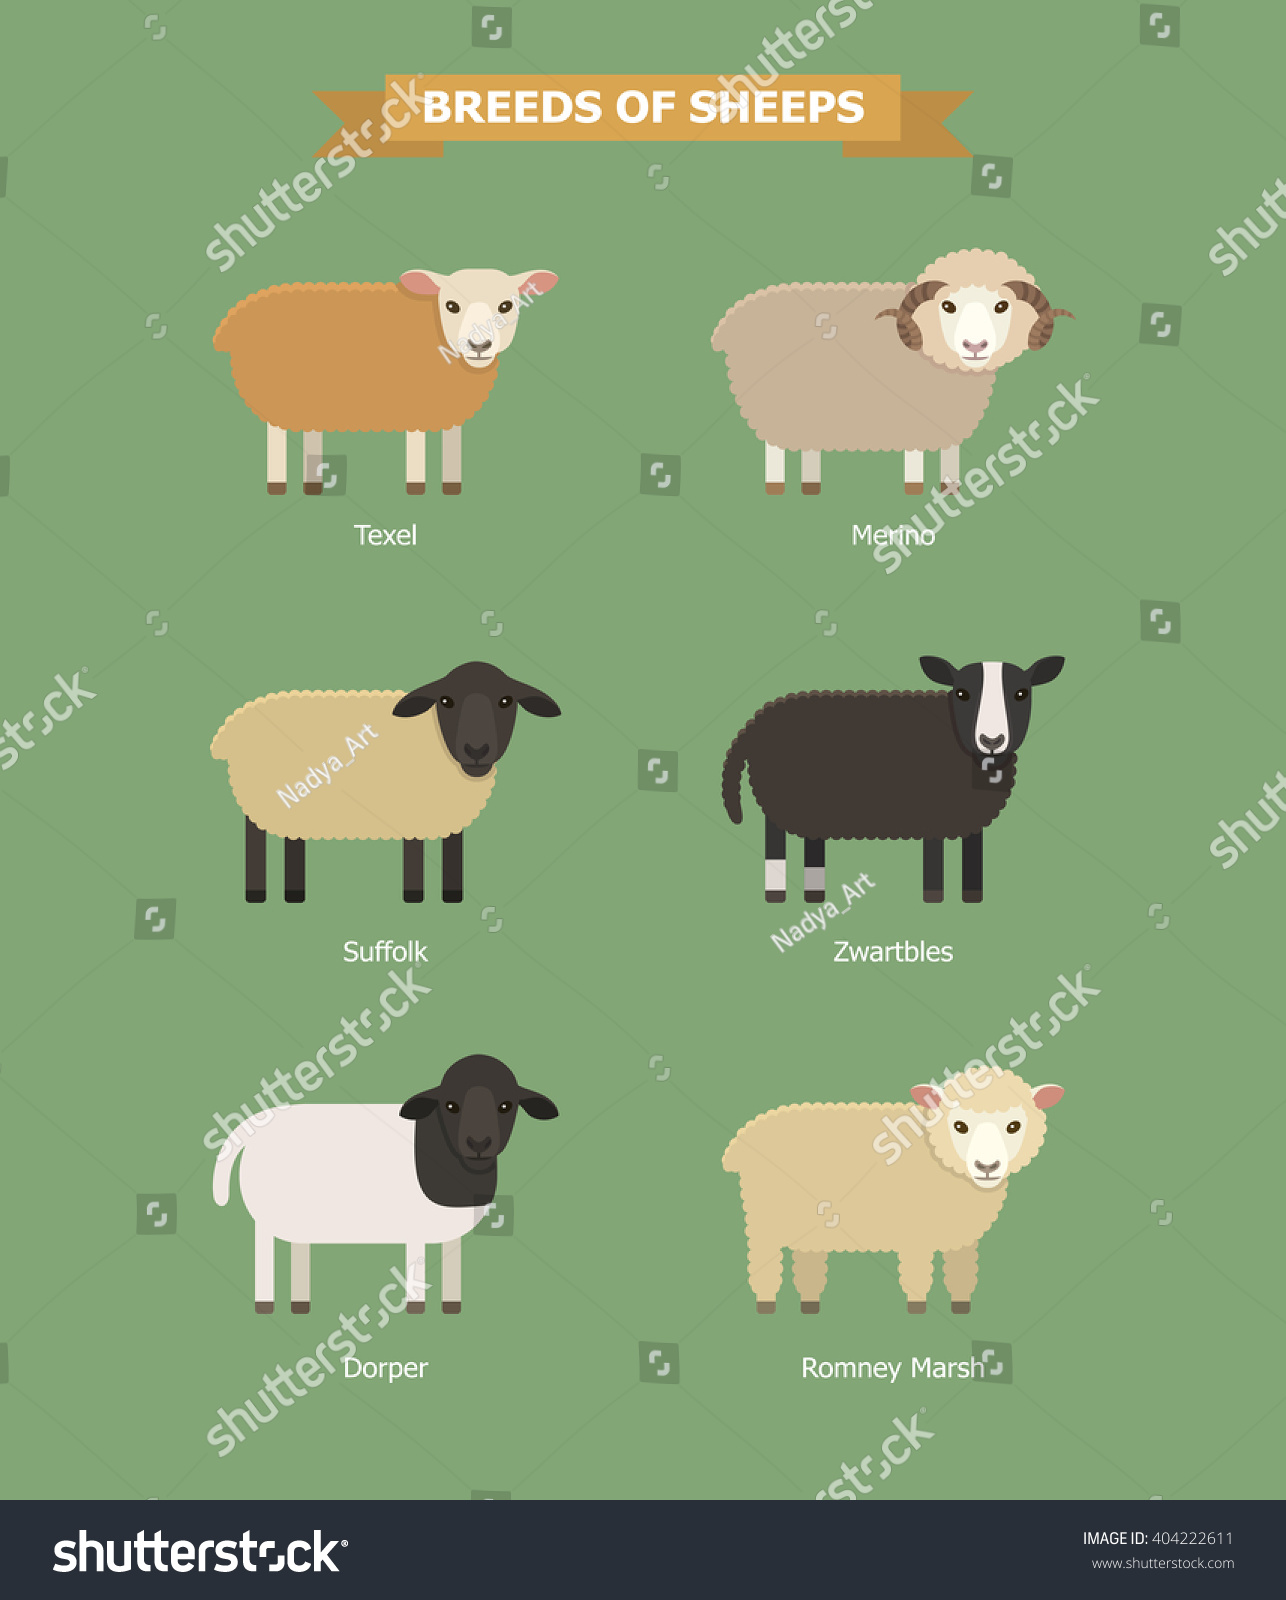 SVG of Set of six breeds dairy, wool and meet sheeps. Sheep breeding. Vector illustration of cartoon sheeps. Farm animals. Different color sheeps: red, white, black and white, black. Vector sheeps. svg